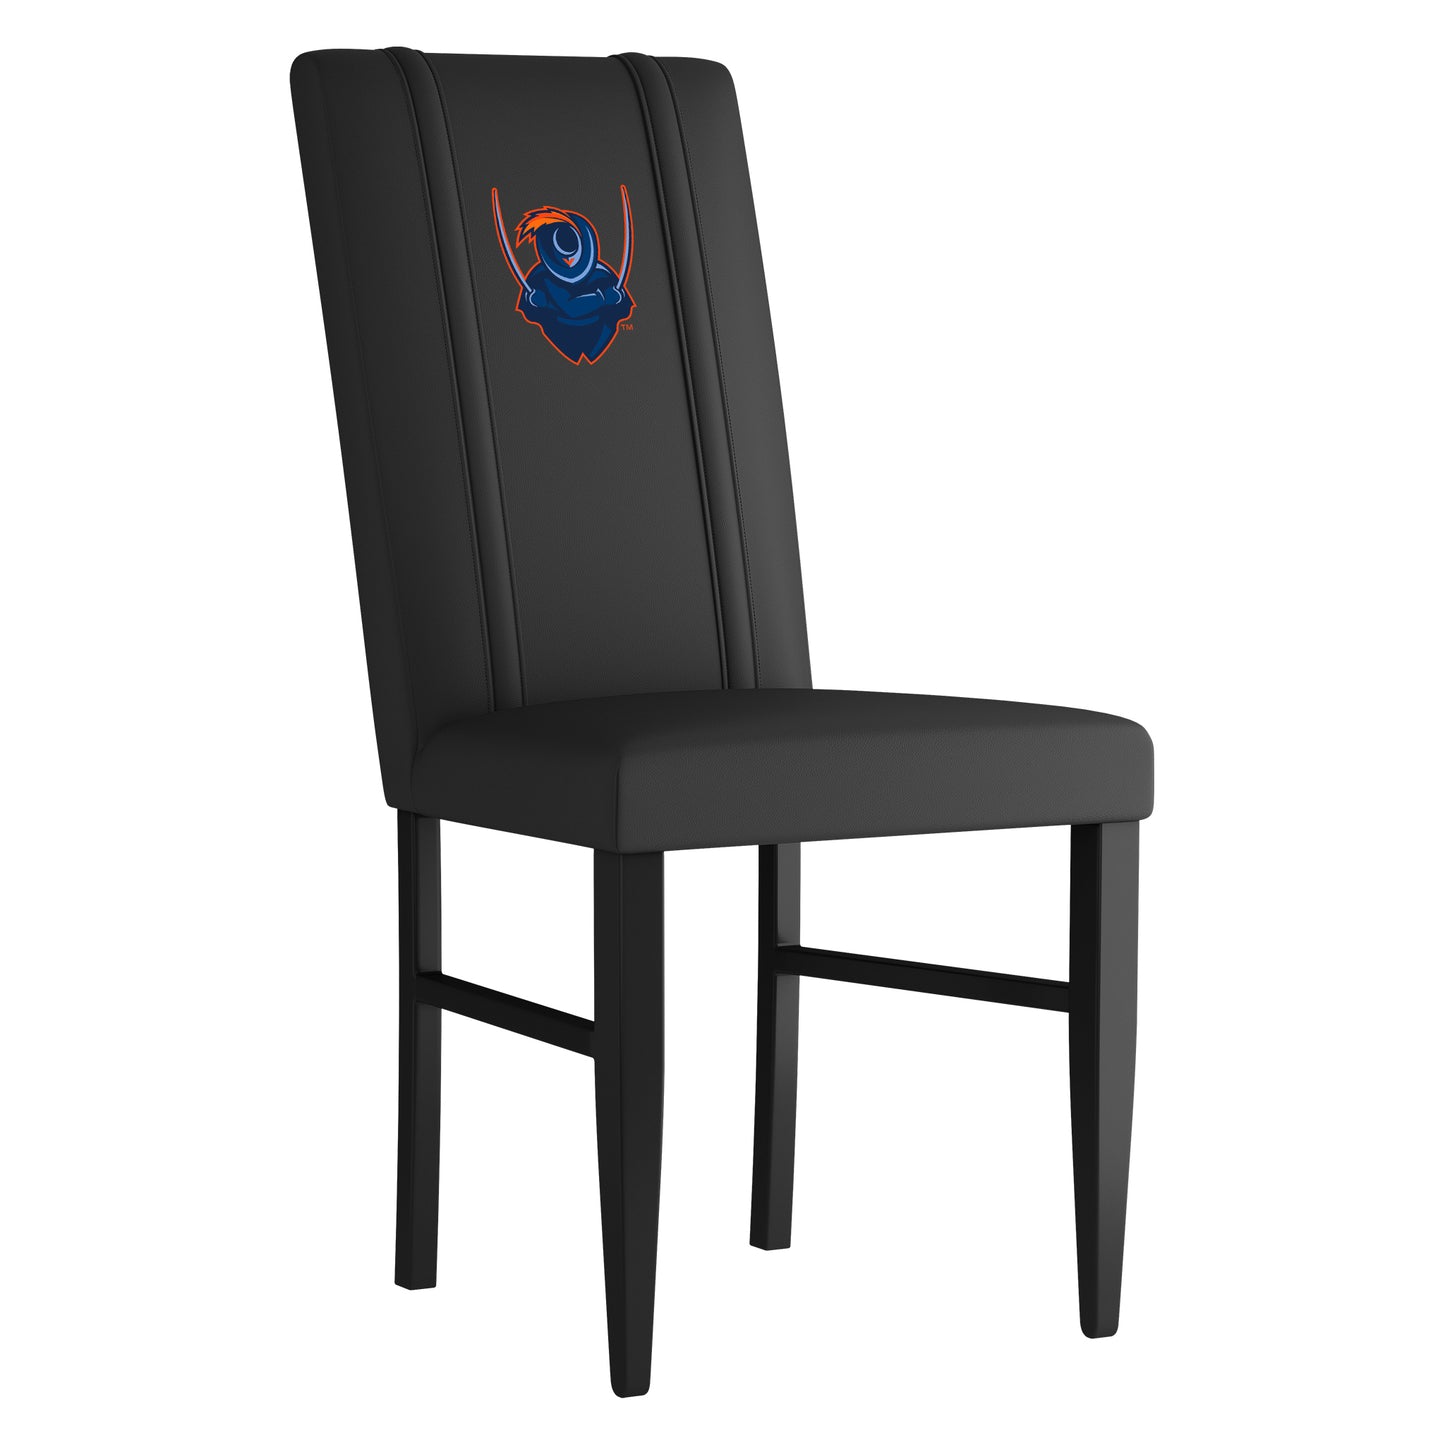 Side Chair 2000 with Virginia Cavaliers Alternate Logo Set of 2